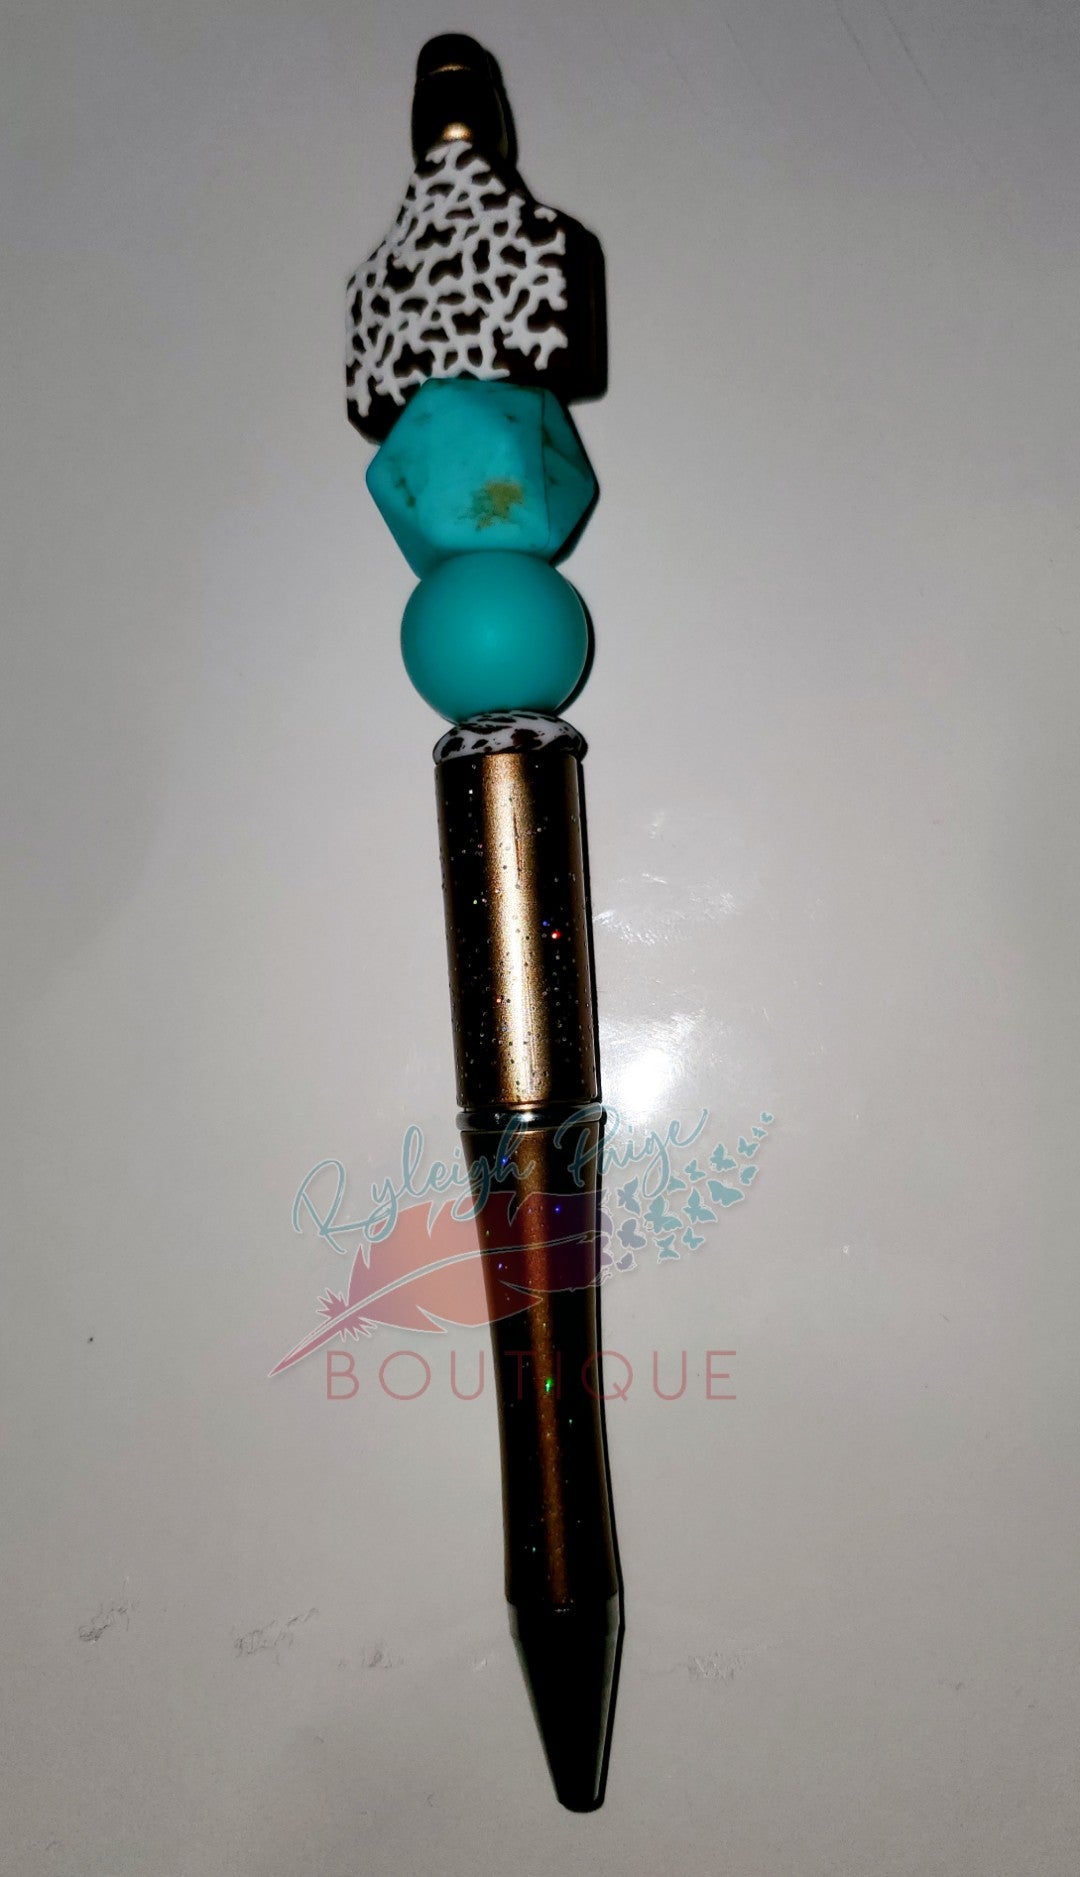 Beautiful Pens | Ryleigh Paige Boutique